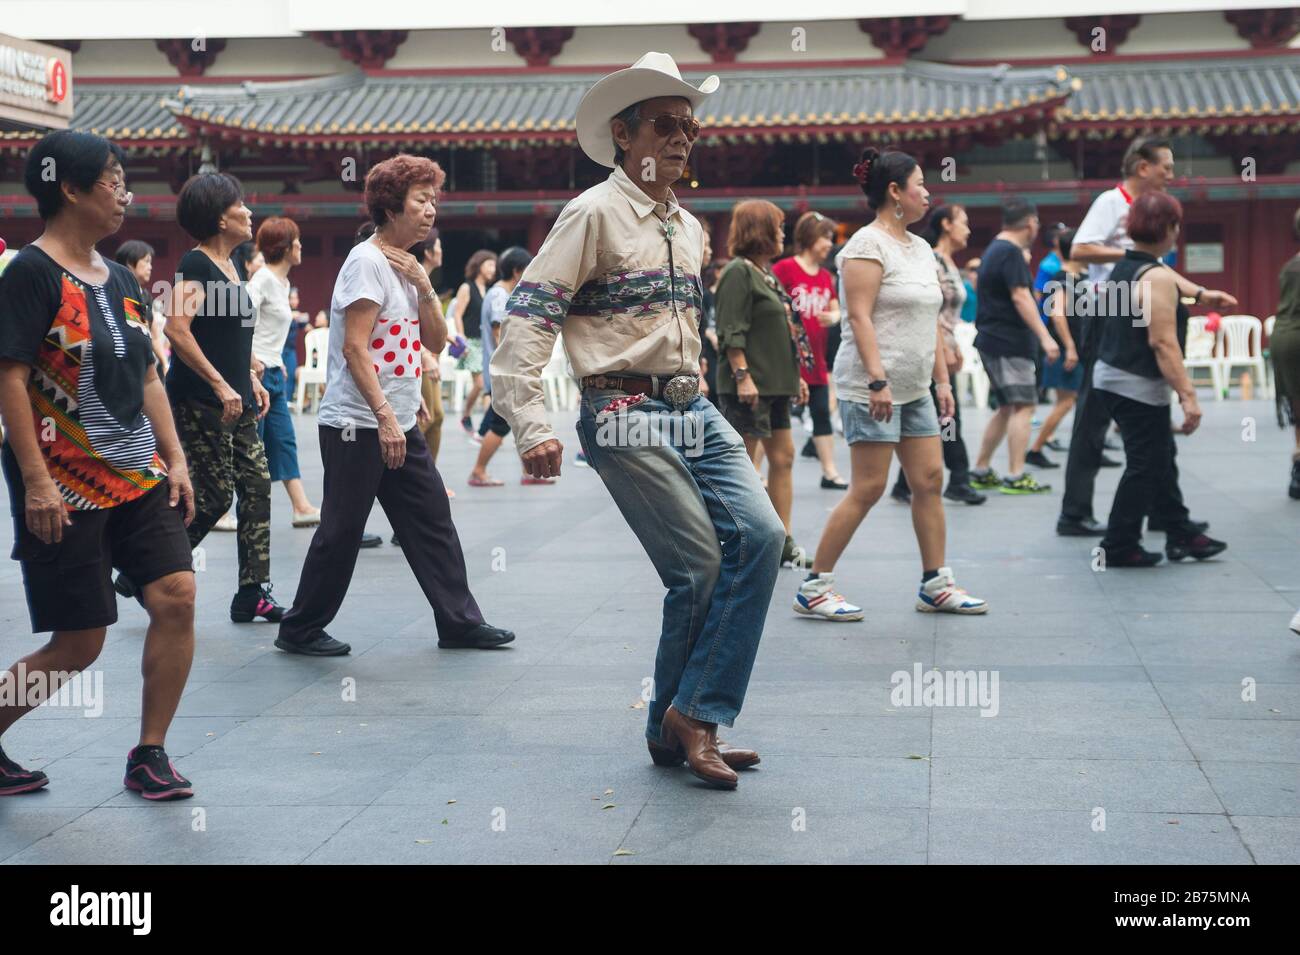 22.10.2017, Singapore, Republic of Singapore, Asia - A group of elderly people meets on Sundays for line dancing in a public square next to the Buddha Tooth Relic Temple in Singapore's Chinatown district. [automated translation] Stock Photo